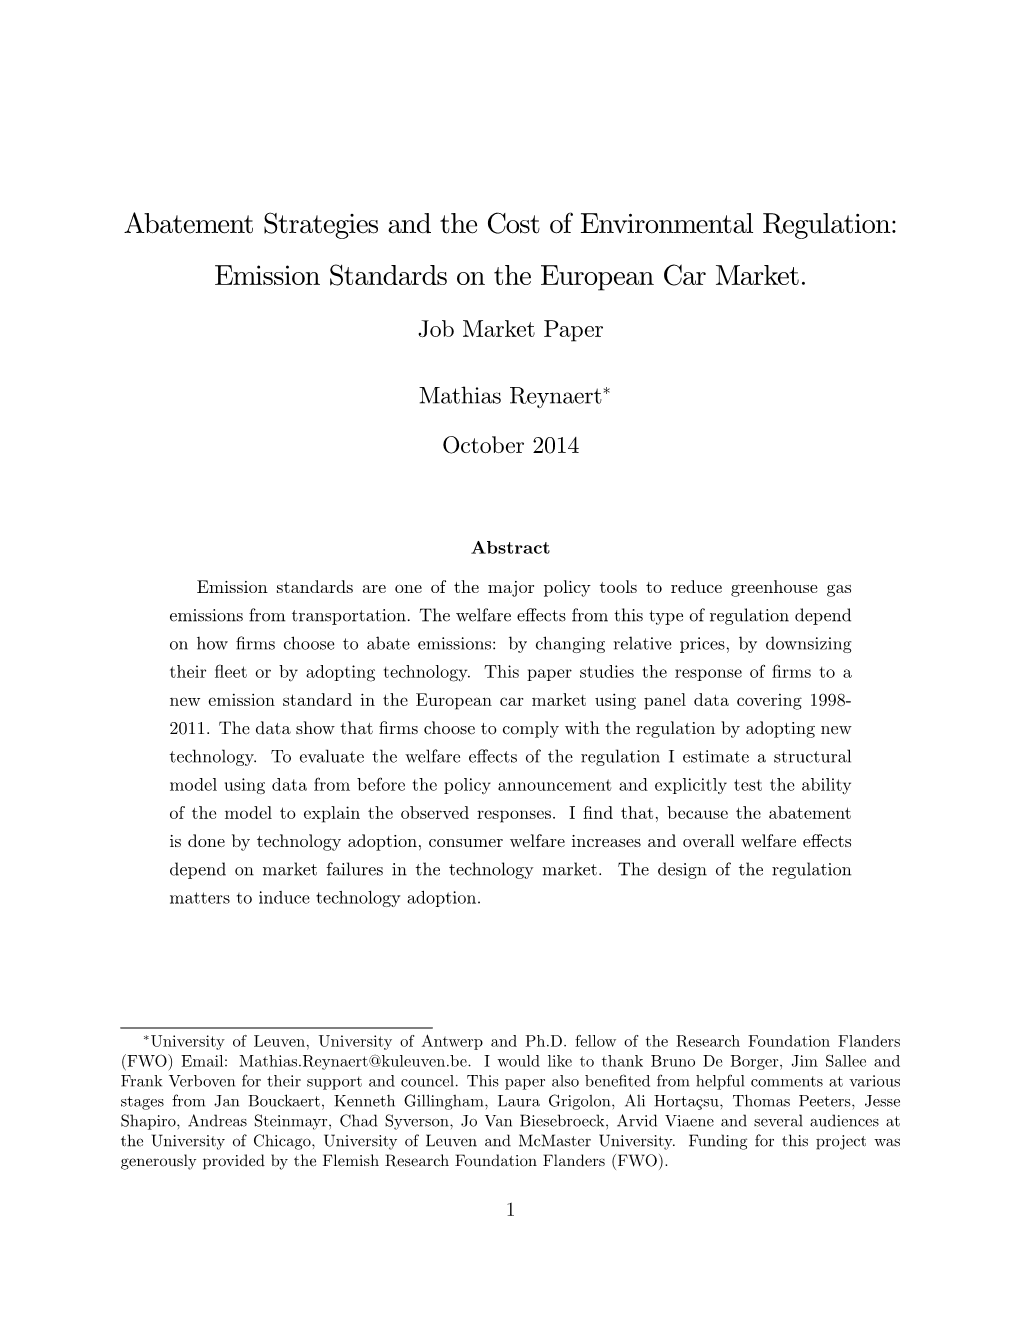 Abatement Strategies and the Cost of Environmental Regulation: Emission Standards on the European Car Market